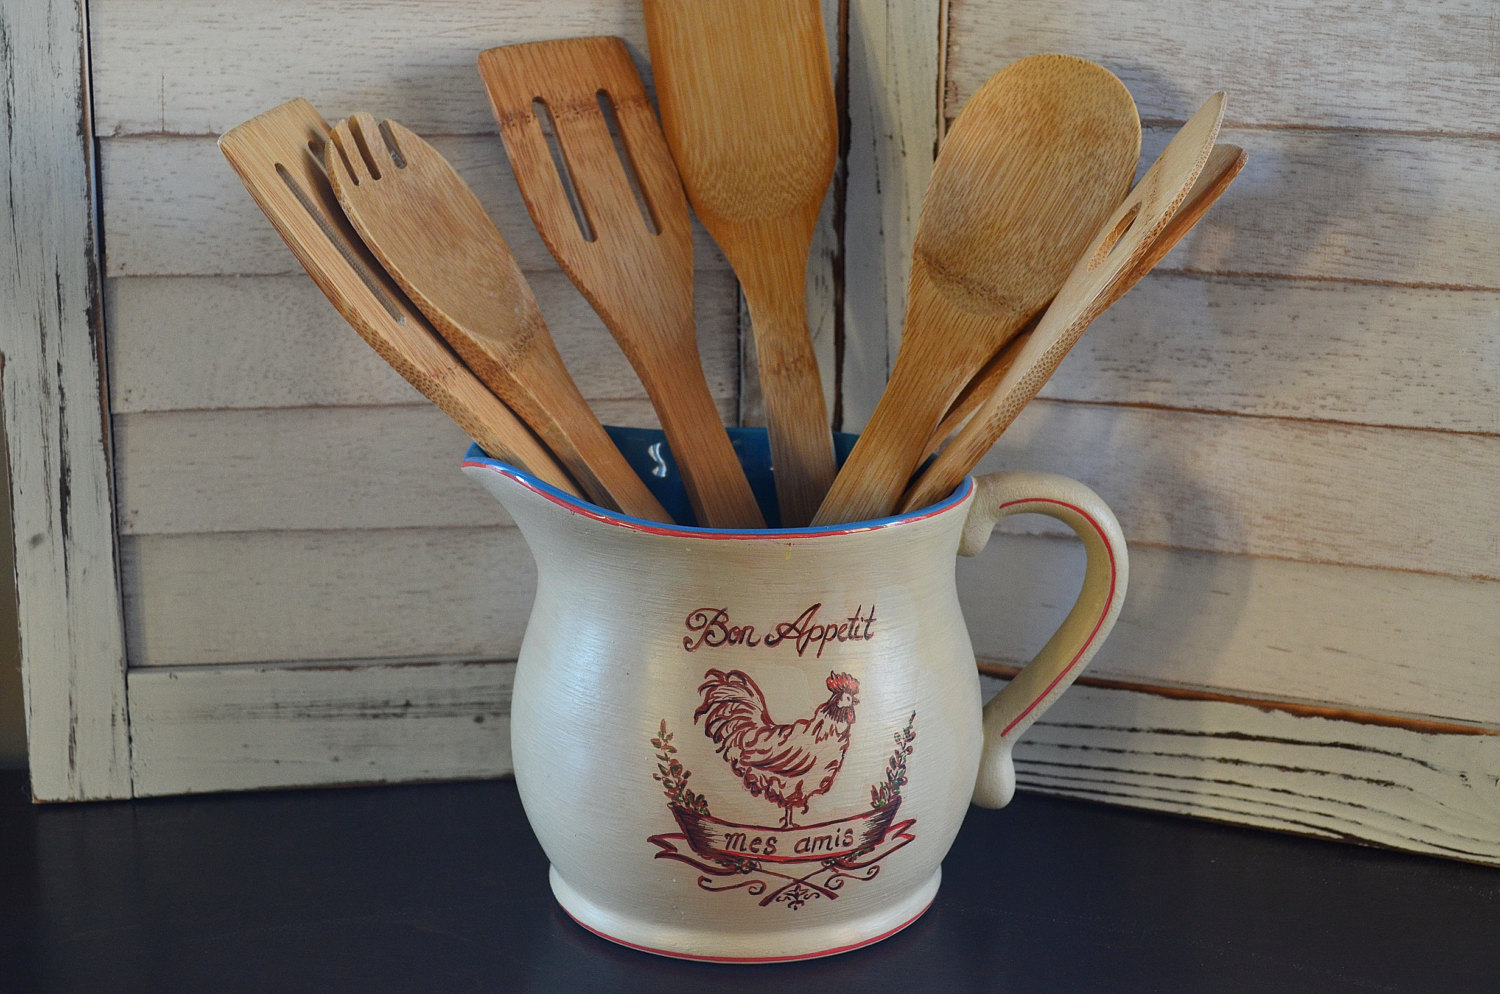 french country kitchen utensils photo - 2